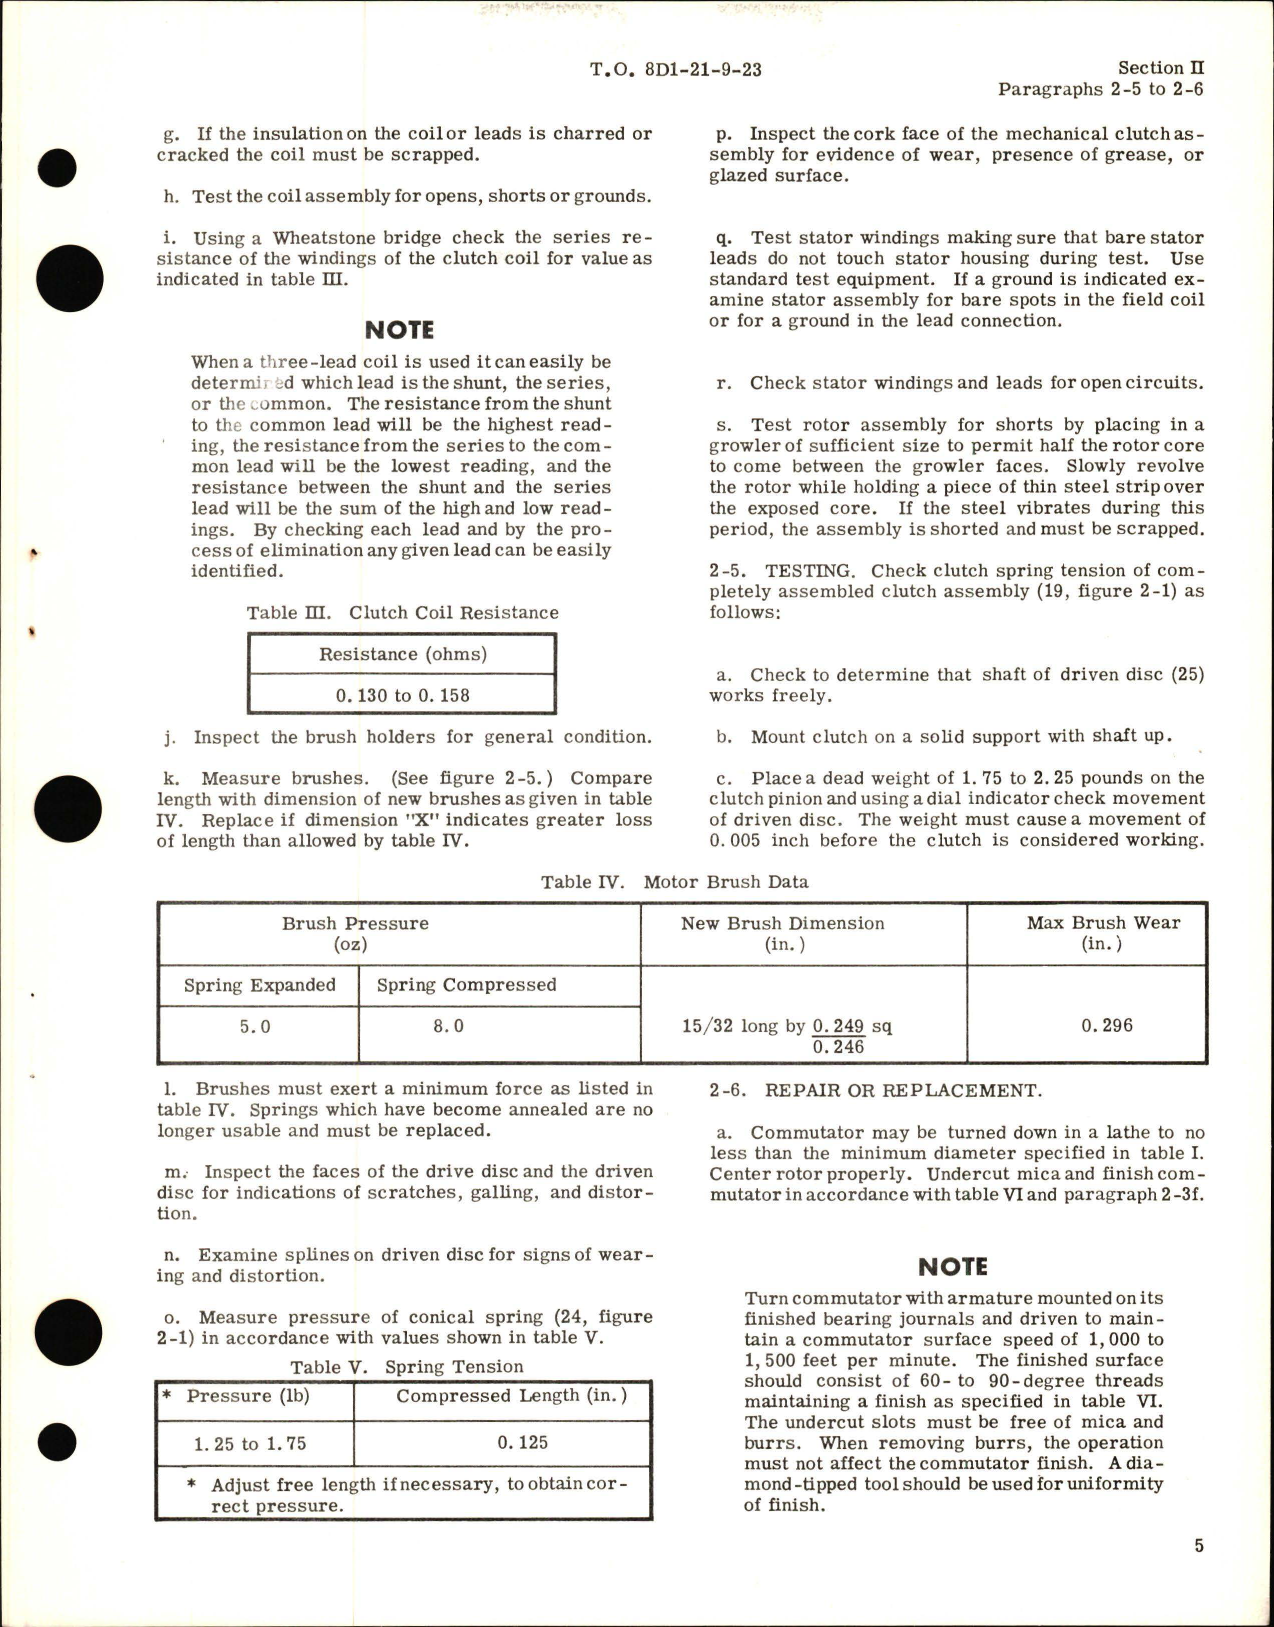 Sample page 7 from AirCorps Library document: Overhaul Instructions for Fractional Horsepower Electric Motors - D Frame Series